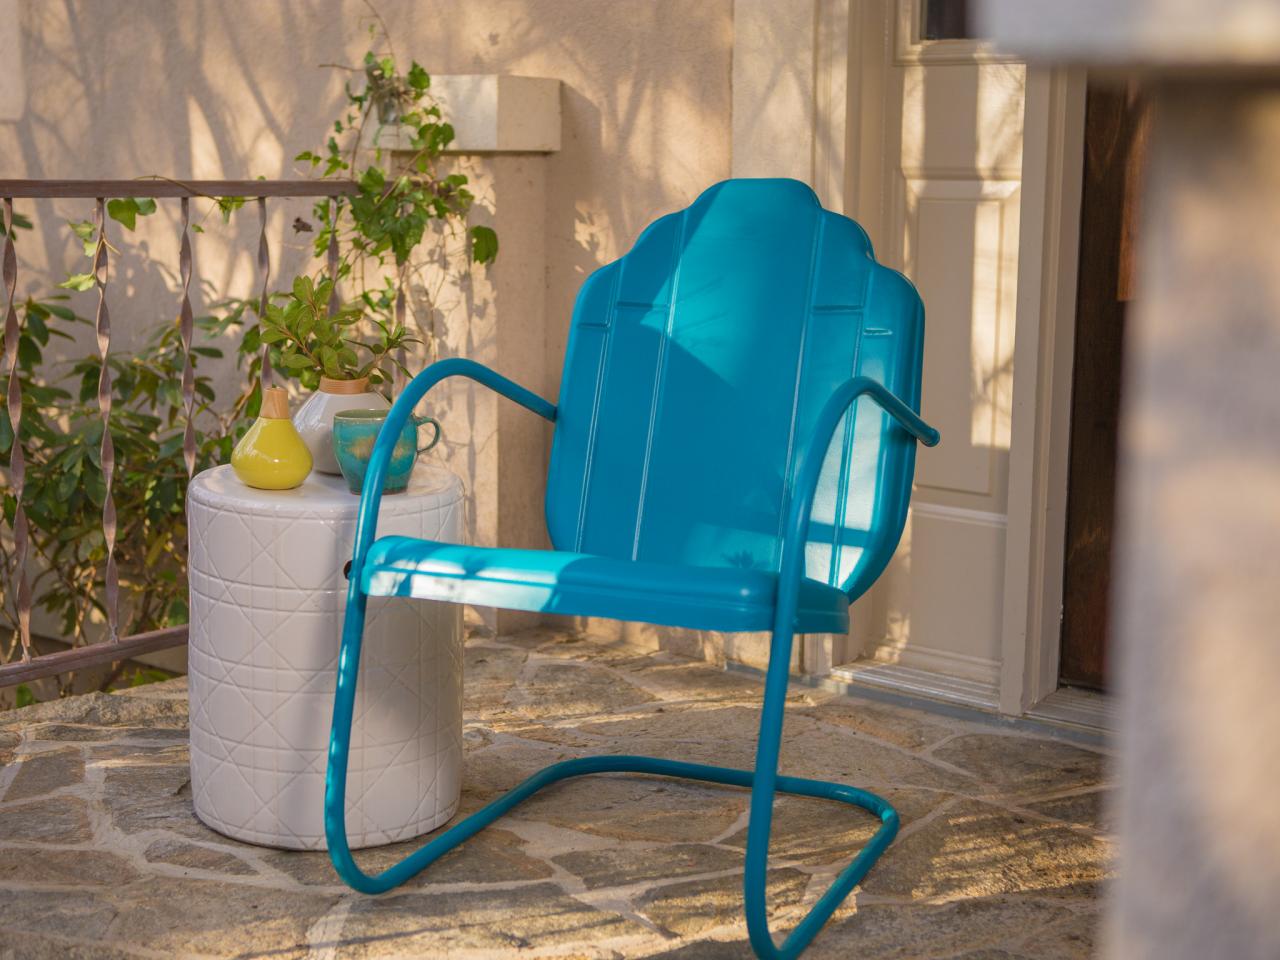 How To Paint An Outdoor Metal Chair, How To Fix Cast Iron Patio Furniture